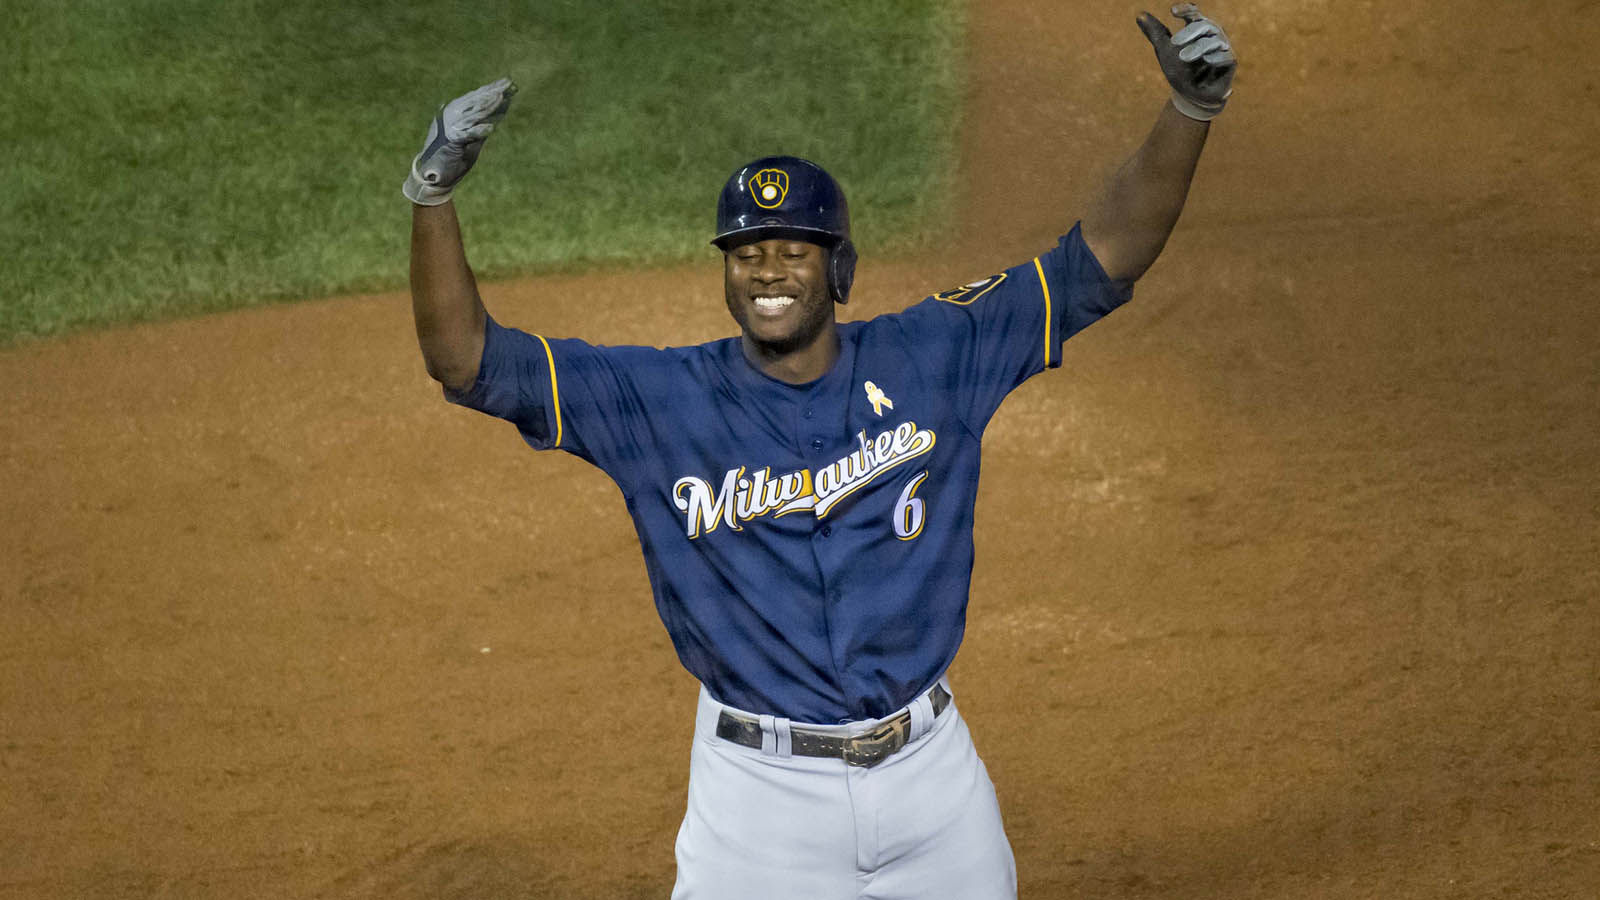 Brewers playoff chase primer: Division within reach